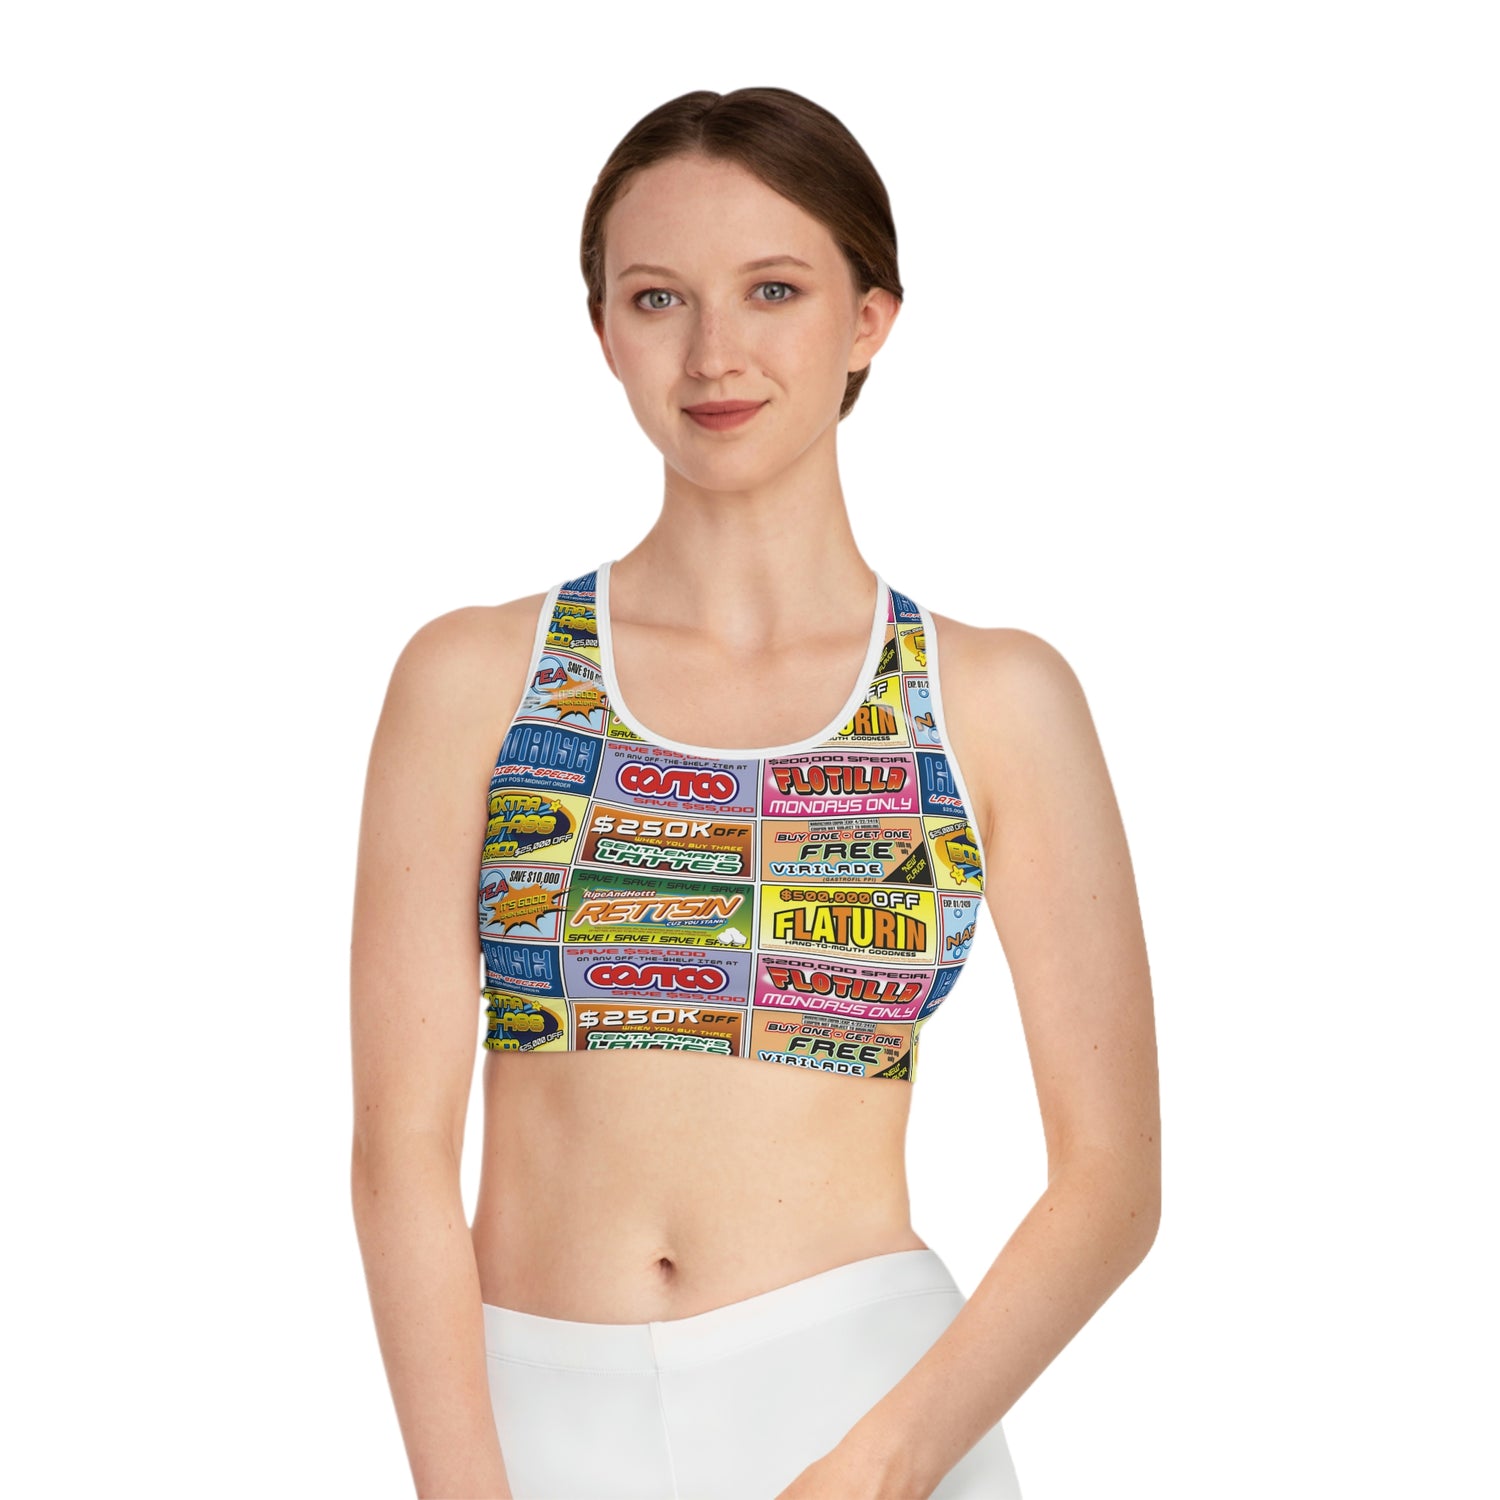 Idiocracy Movie Inspired Bra Featuring Fake Brands – Lord and Lady